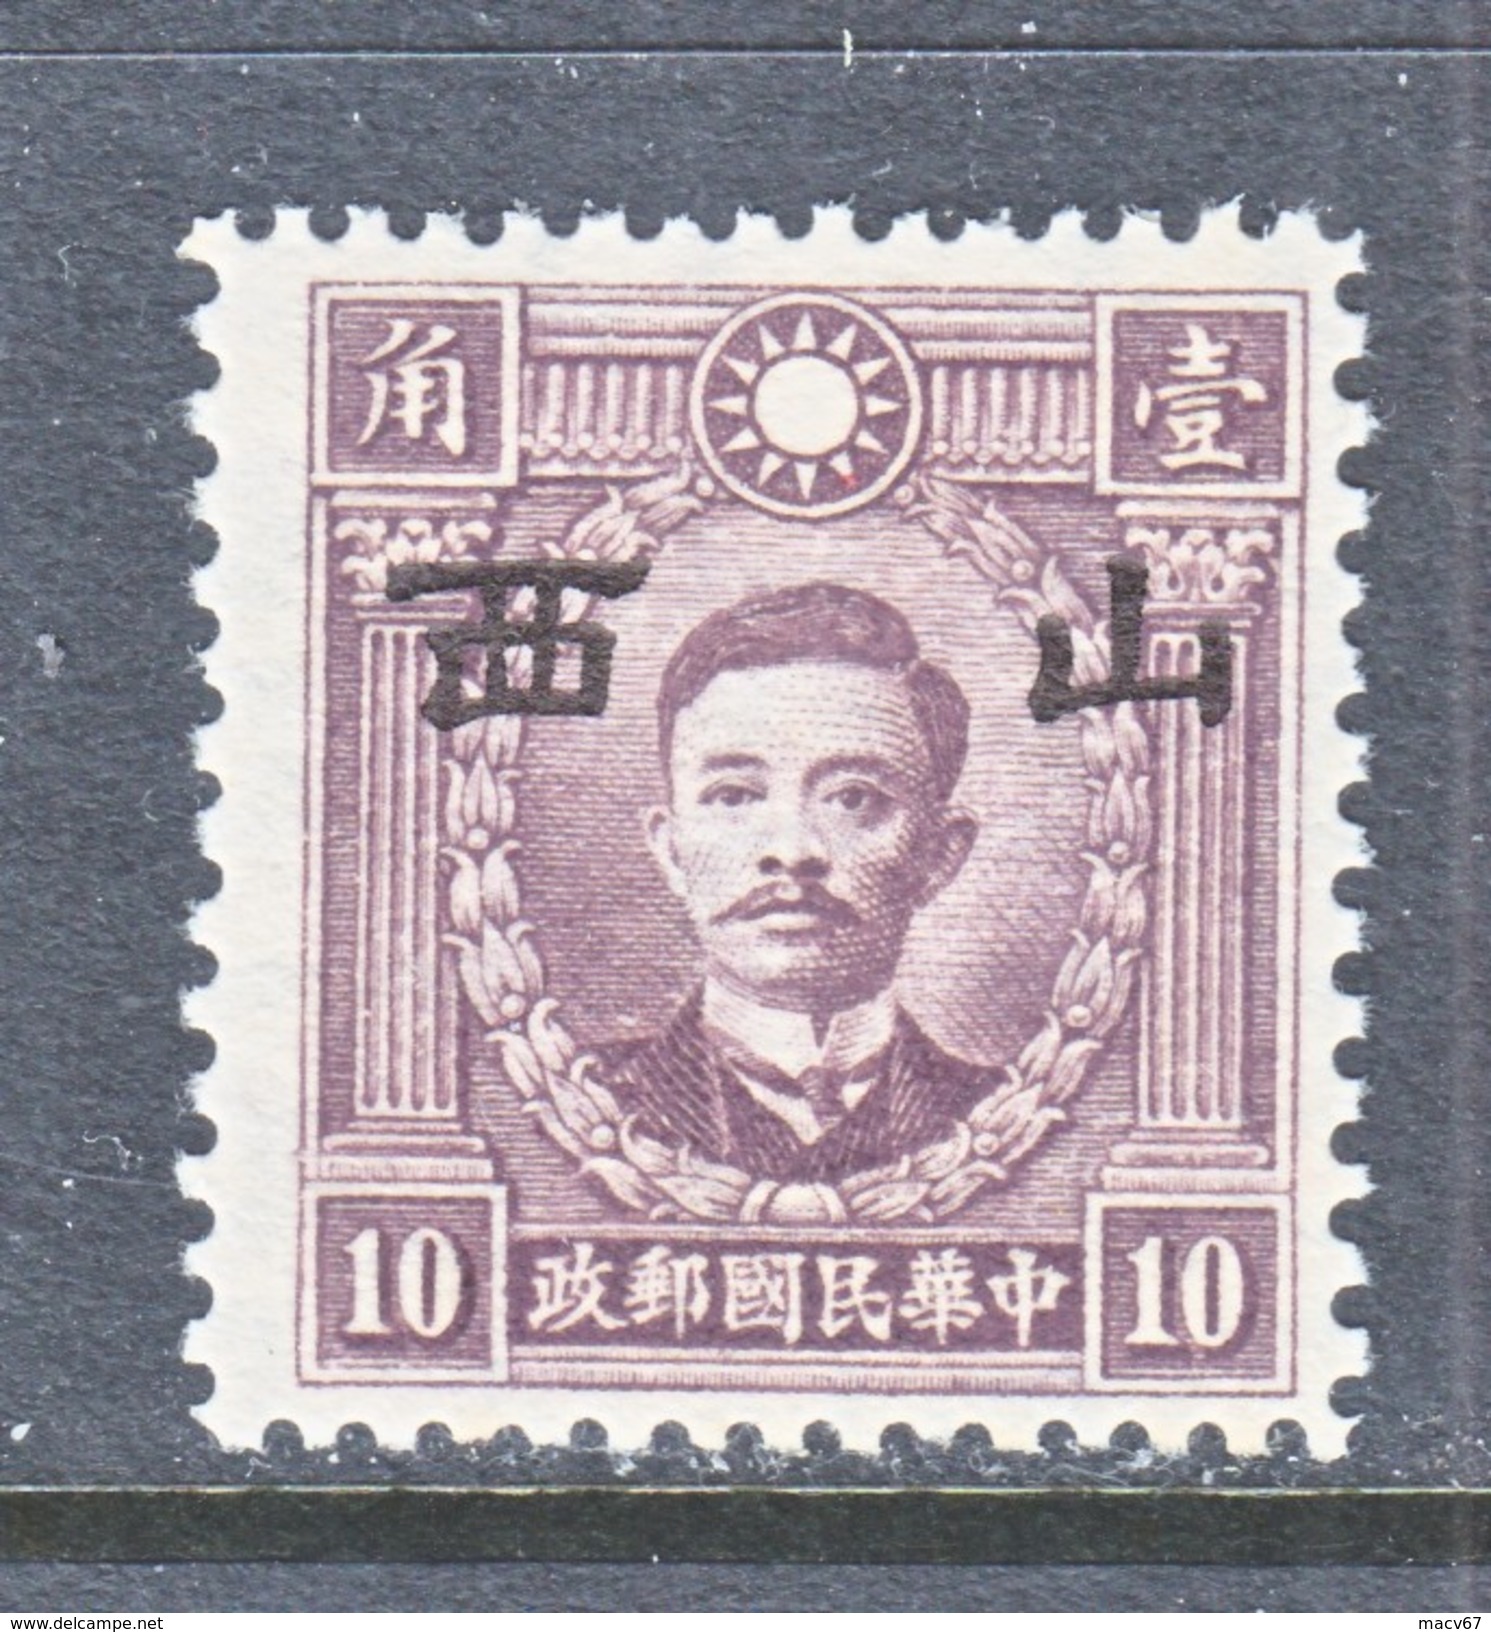 JAPANESE  OCCUP.  SHANSI   5 N 38     **  VARIETY  TYPE II  MA  CN 496 - 1941-45 Northern China